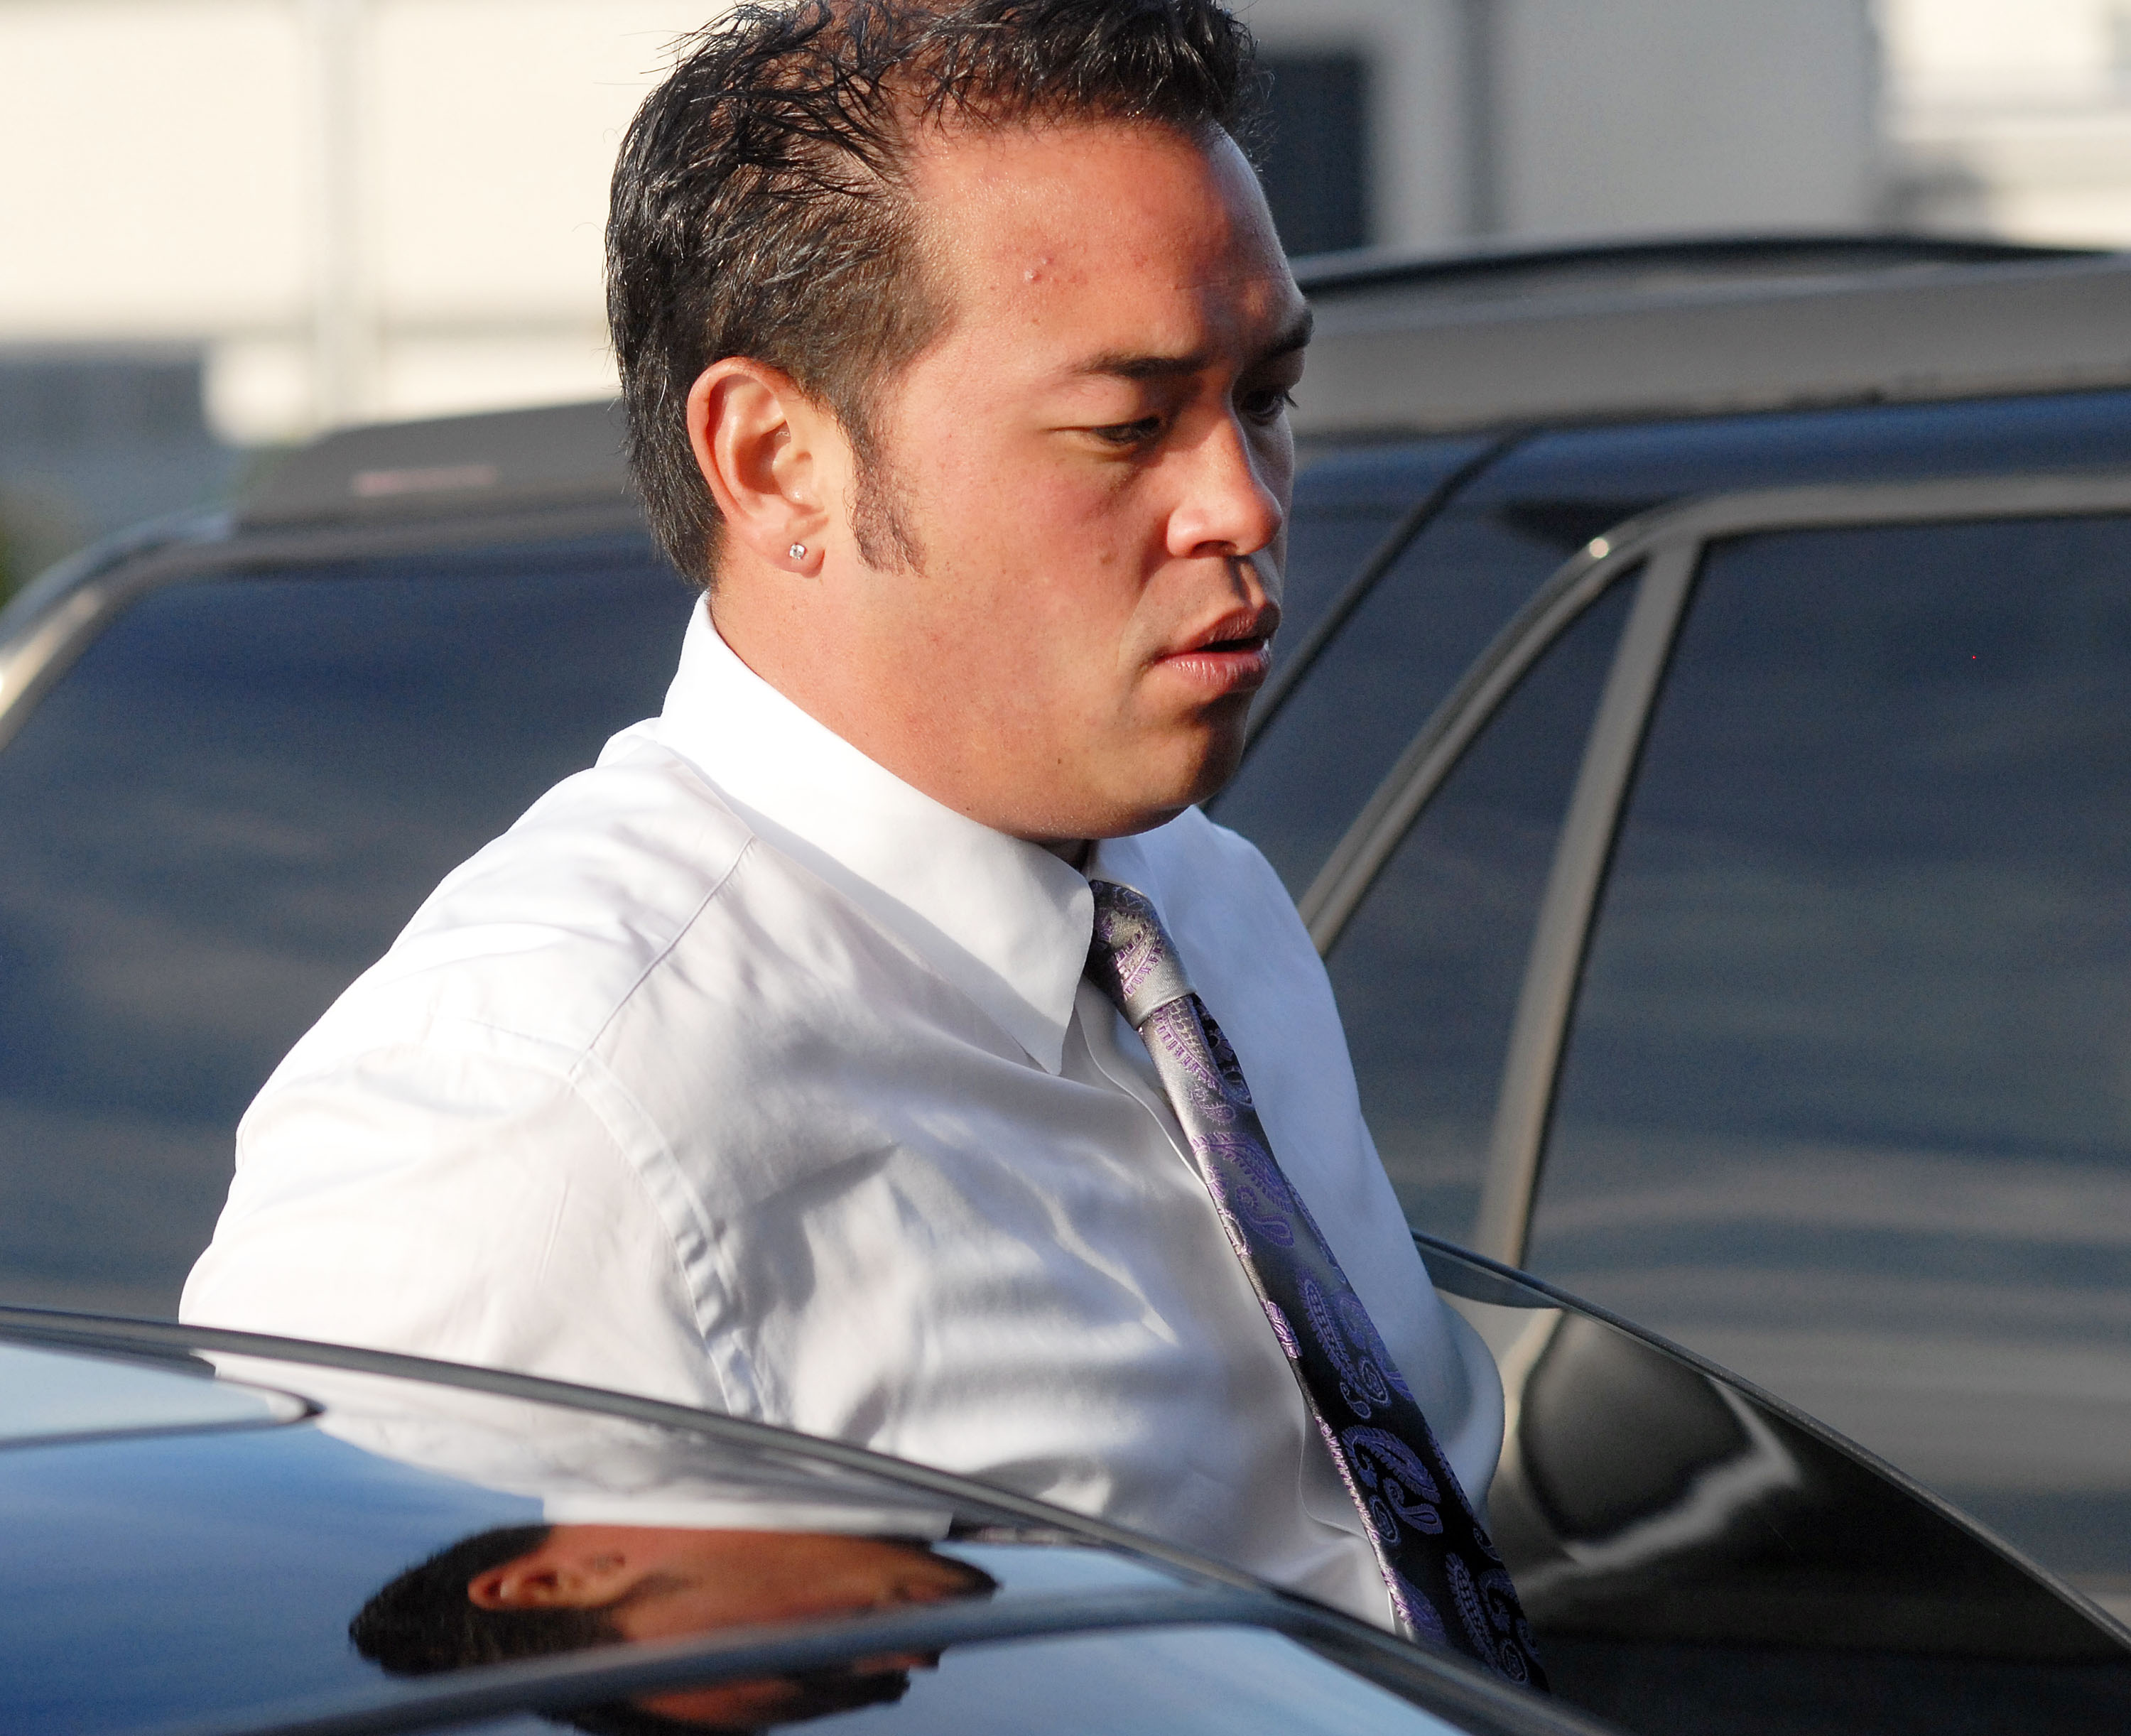 Jon Gosselin leaving Montgomery County Courthouse in Norristown, Pennsylvania on October 26, 2009 | Source: Getty Images